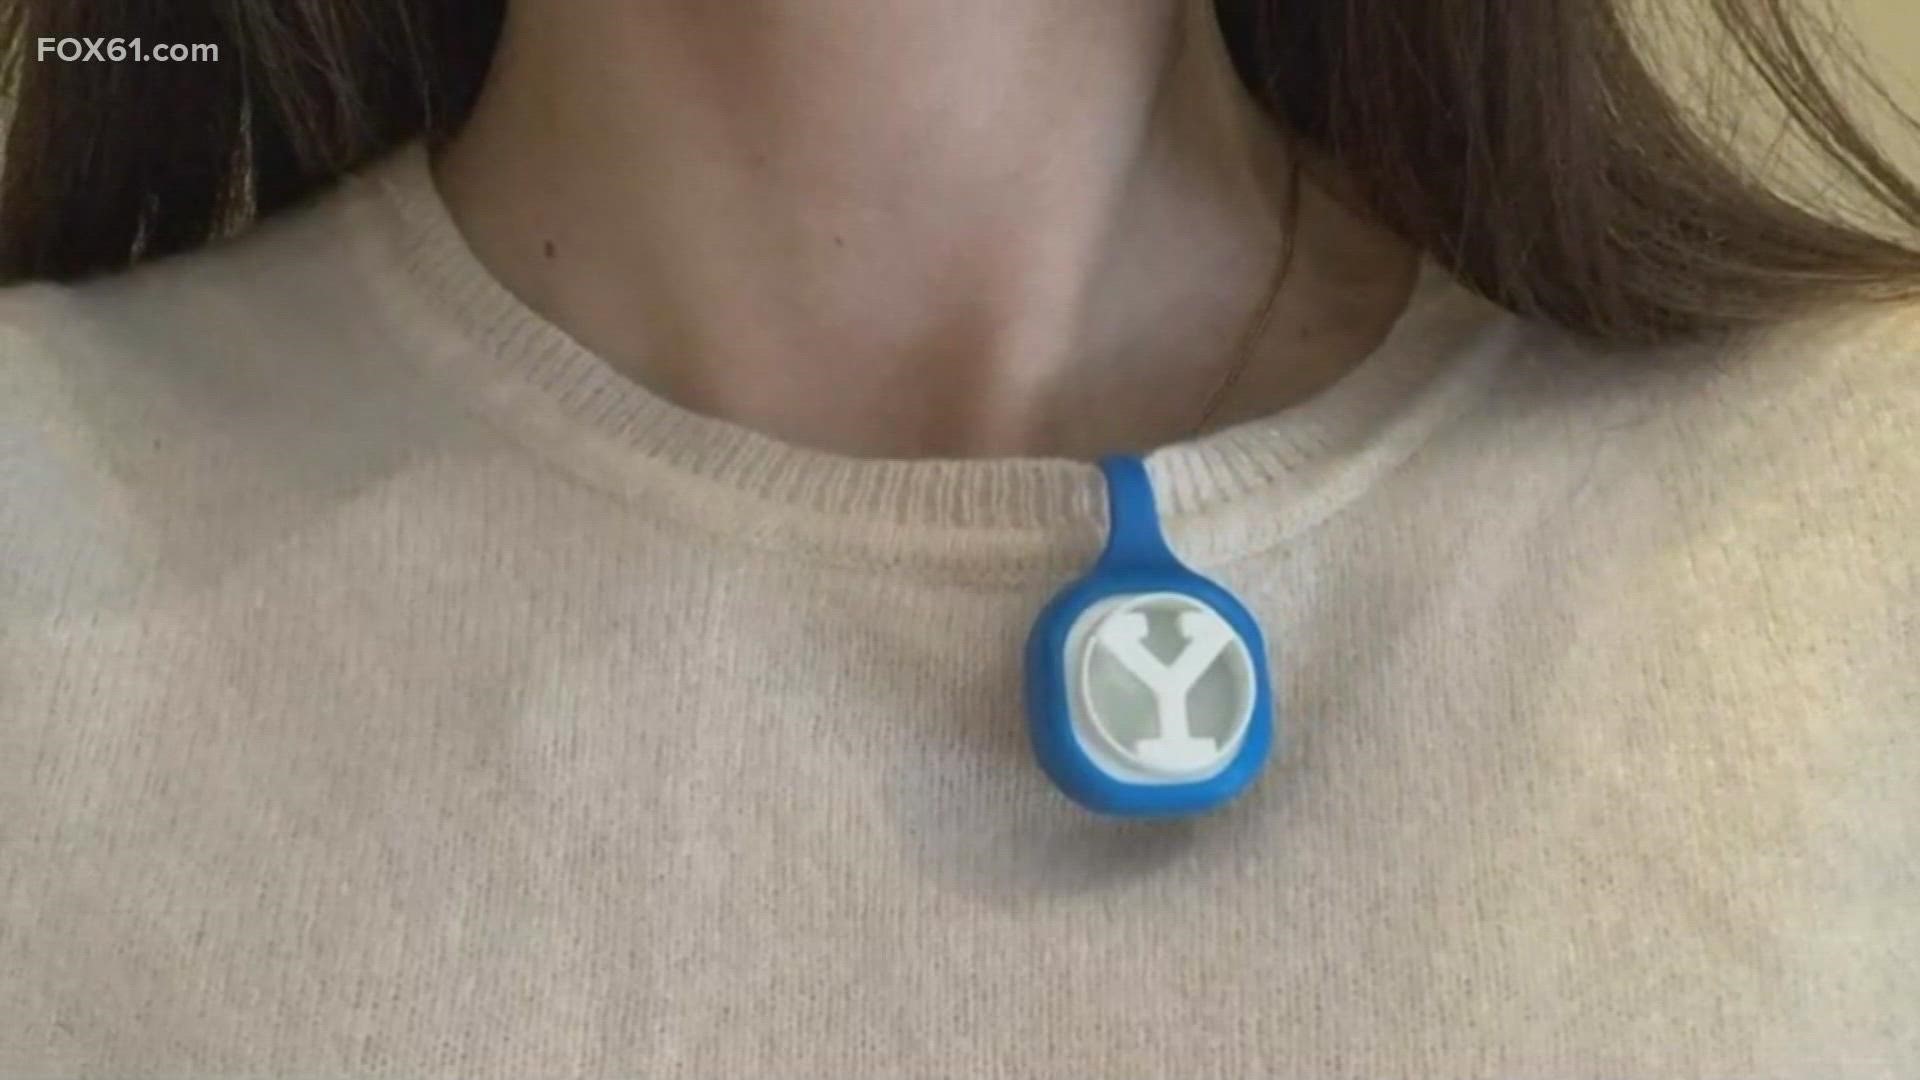 Yale researchers have developed a device that can instantly tell you how prominent COVID is wherever you are. FOX61's Tony Terzi has the story.